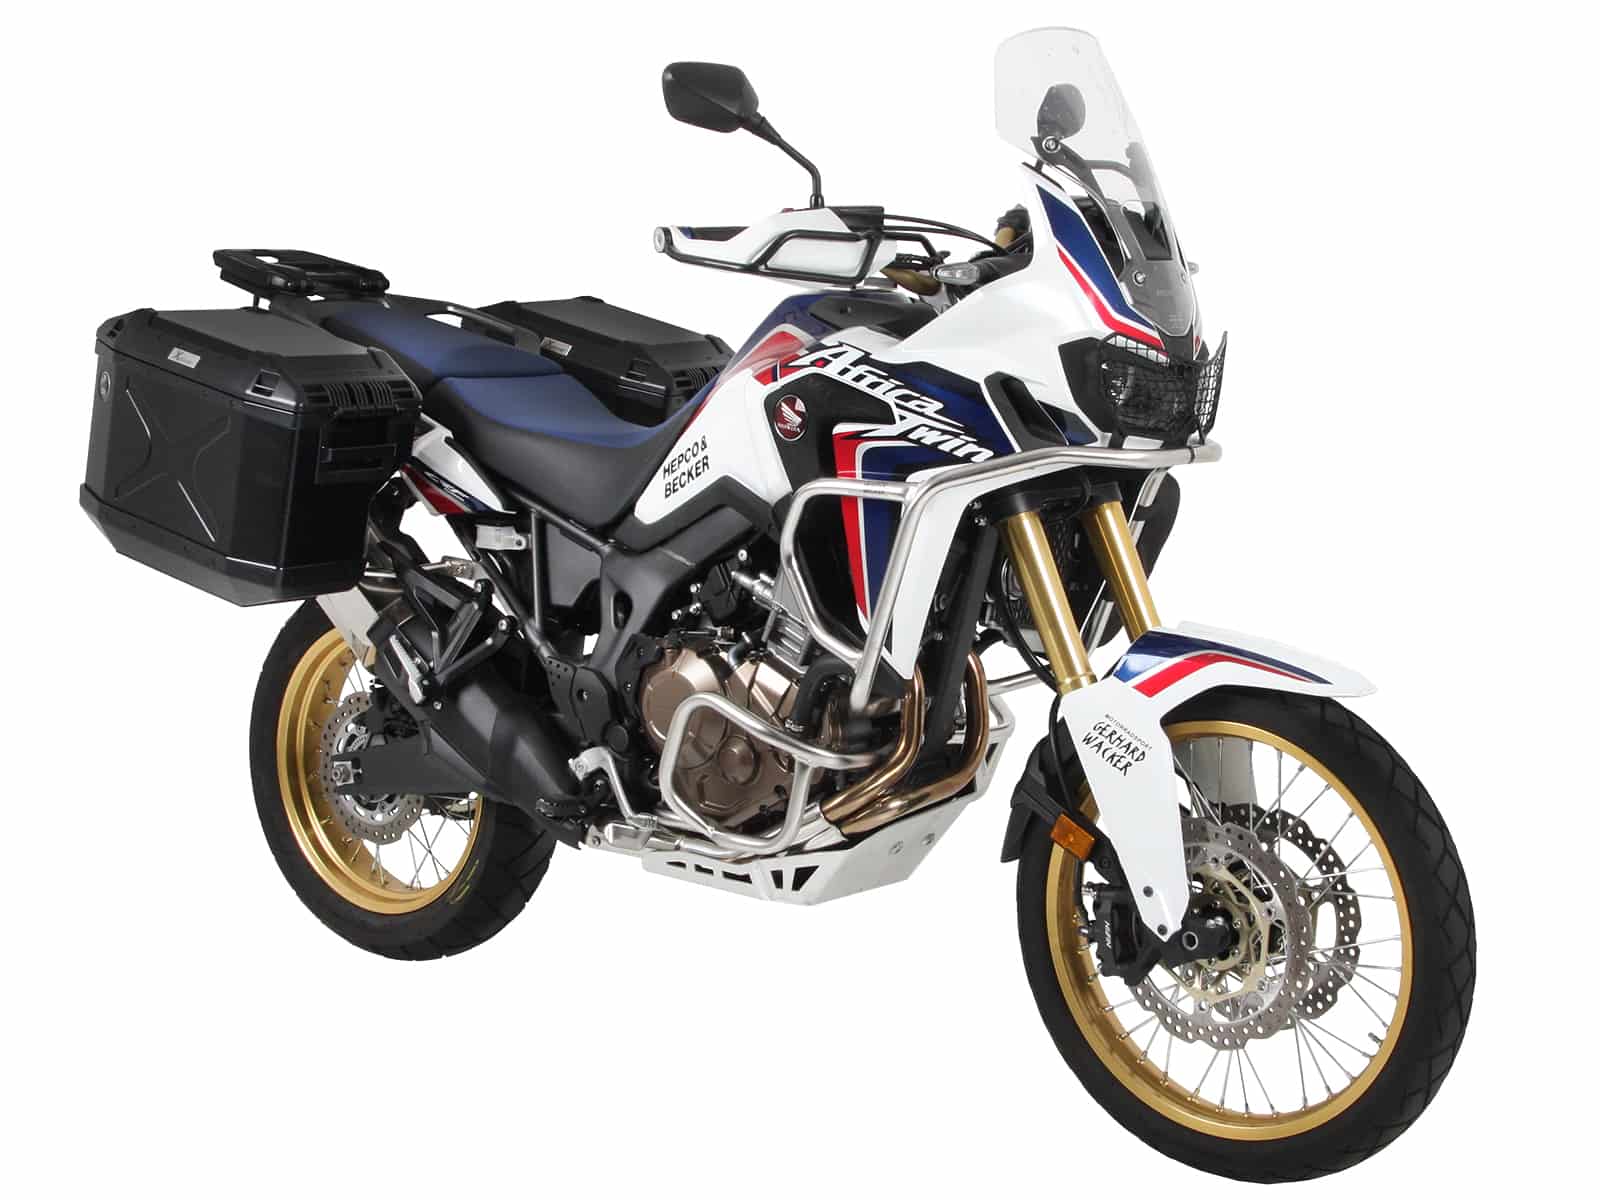 Sidecarrier Cutout stainless steel incl. Xplorer sideboxes silver for Honda CRF1000L Africa Twin (2018-2019)